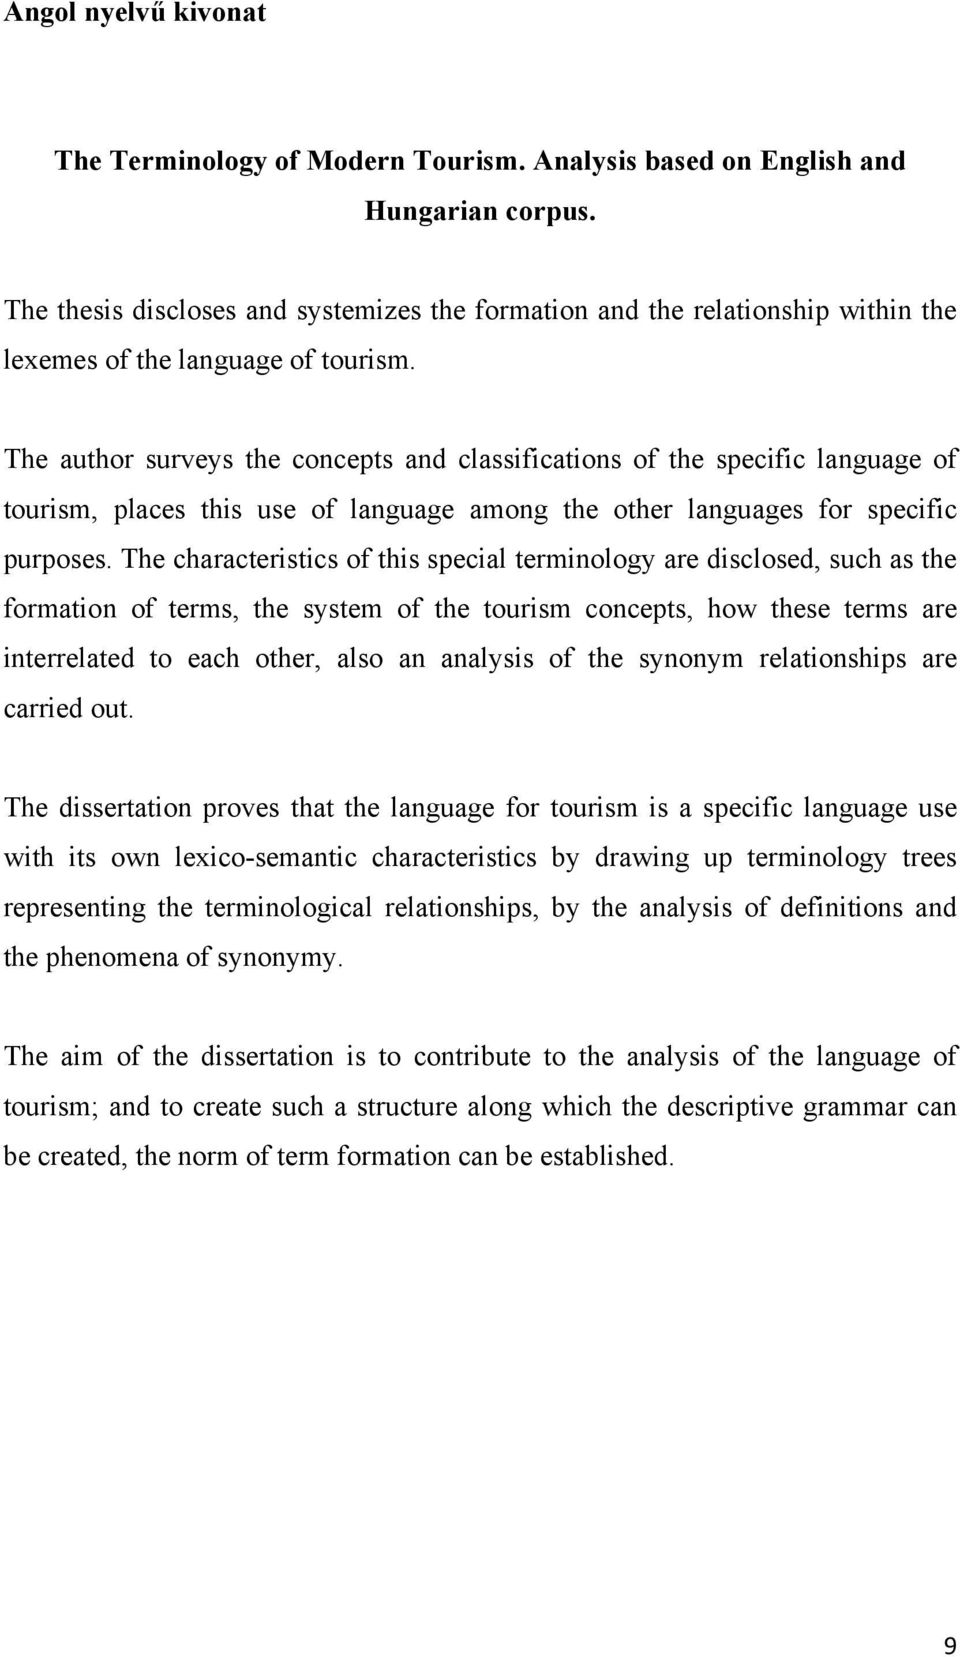 The author surveys the concepts and classifications of the specific language of tourism, places this use of language among the other languages for specific purposes.